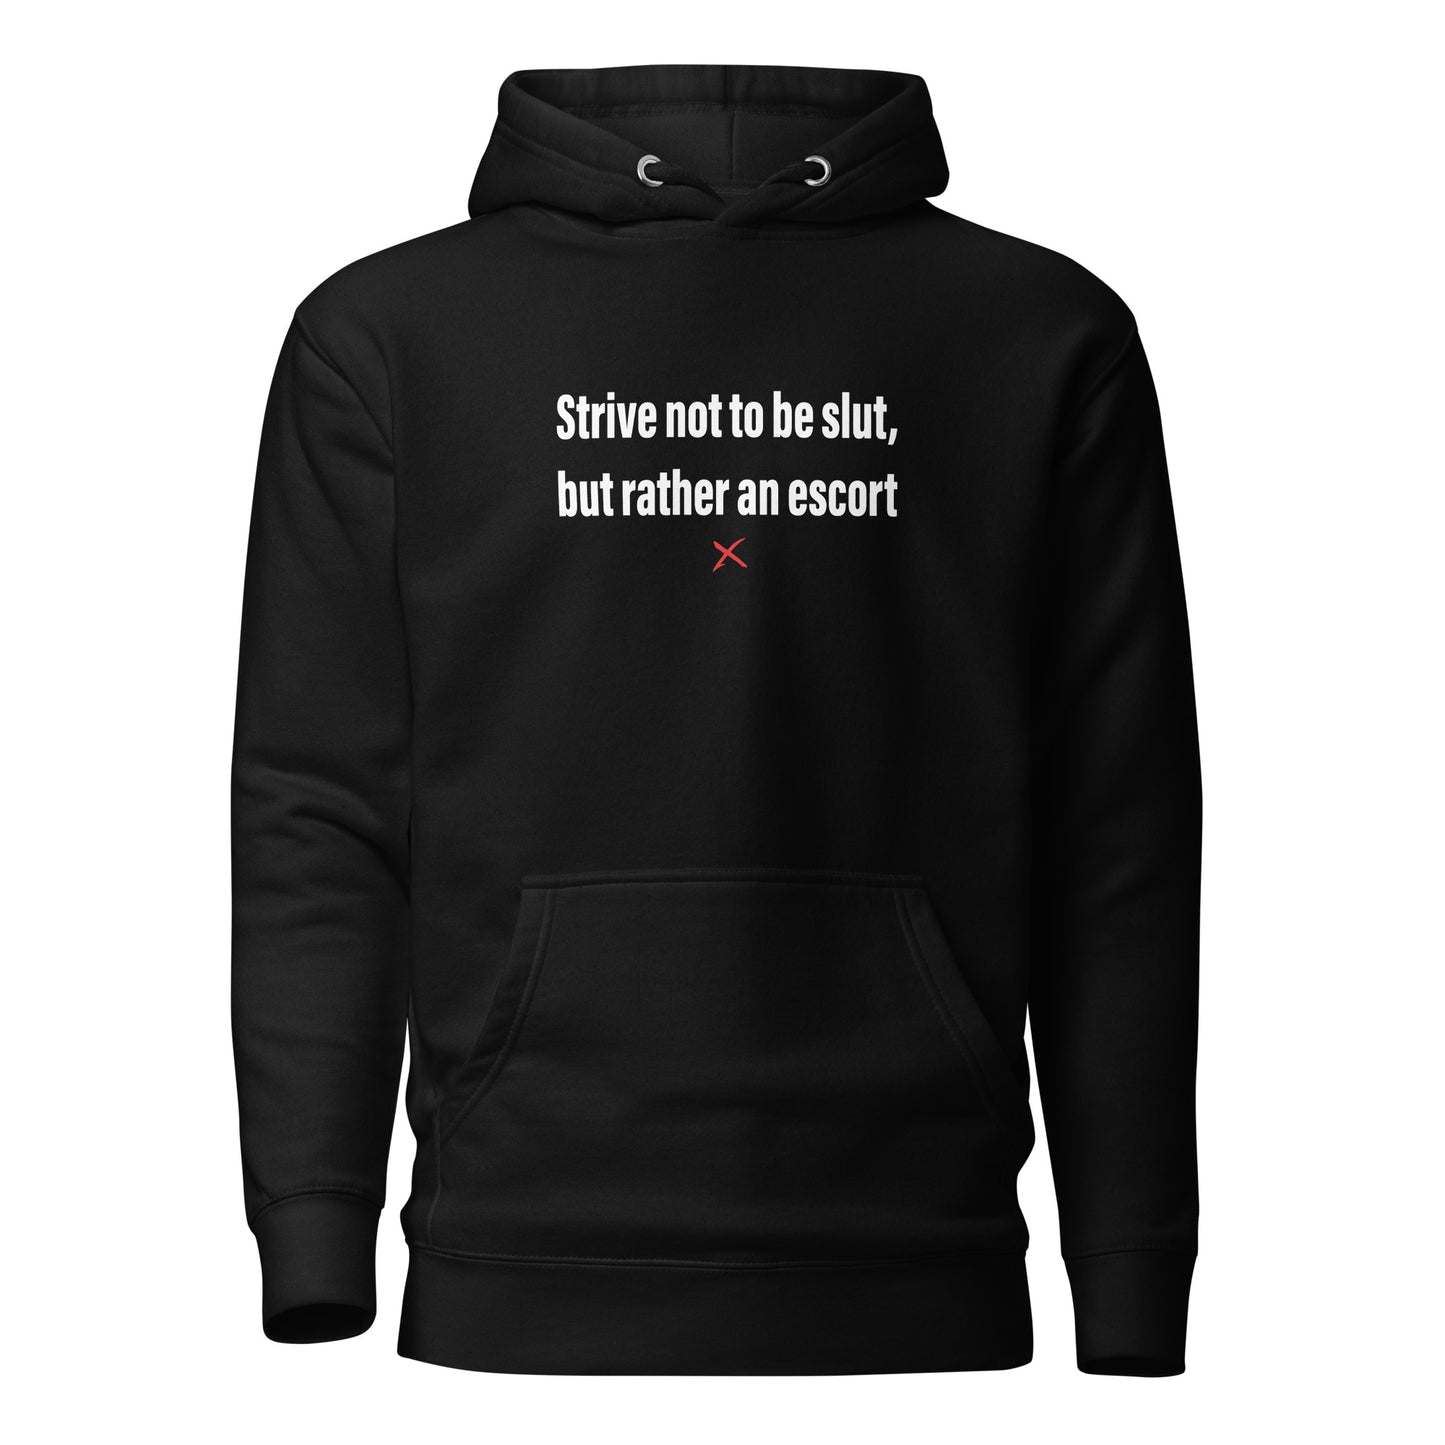 Strive not to be slut, but rather an escort - Hoodie